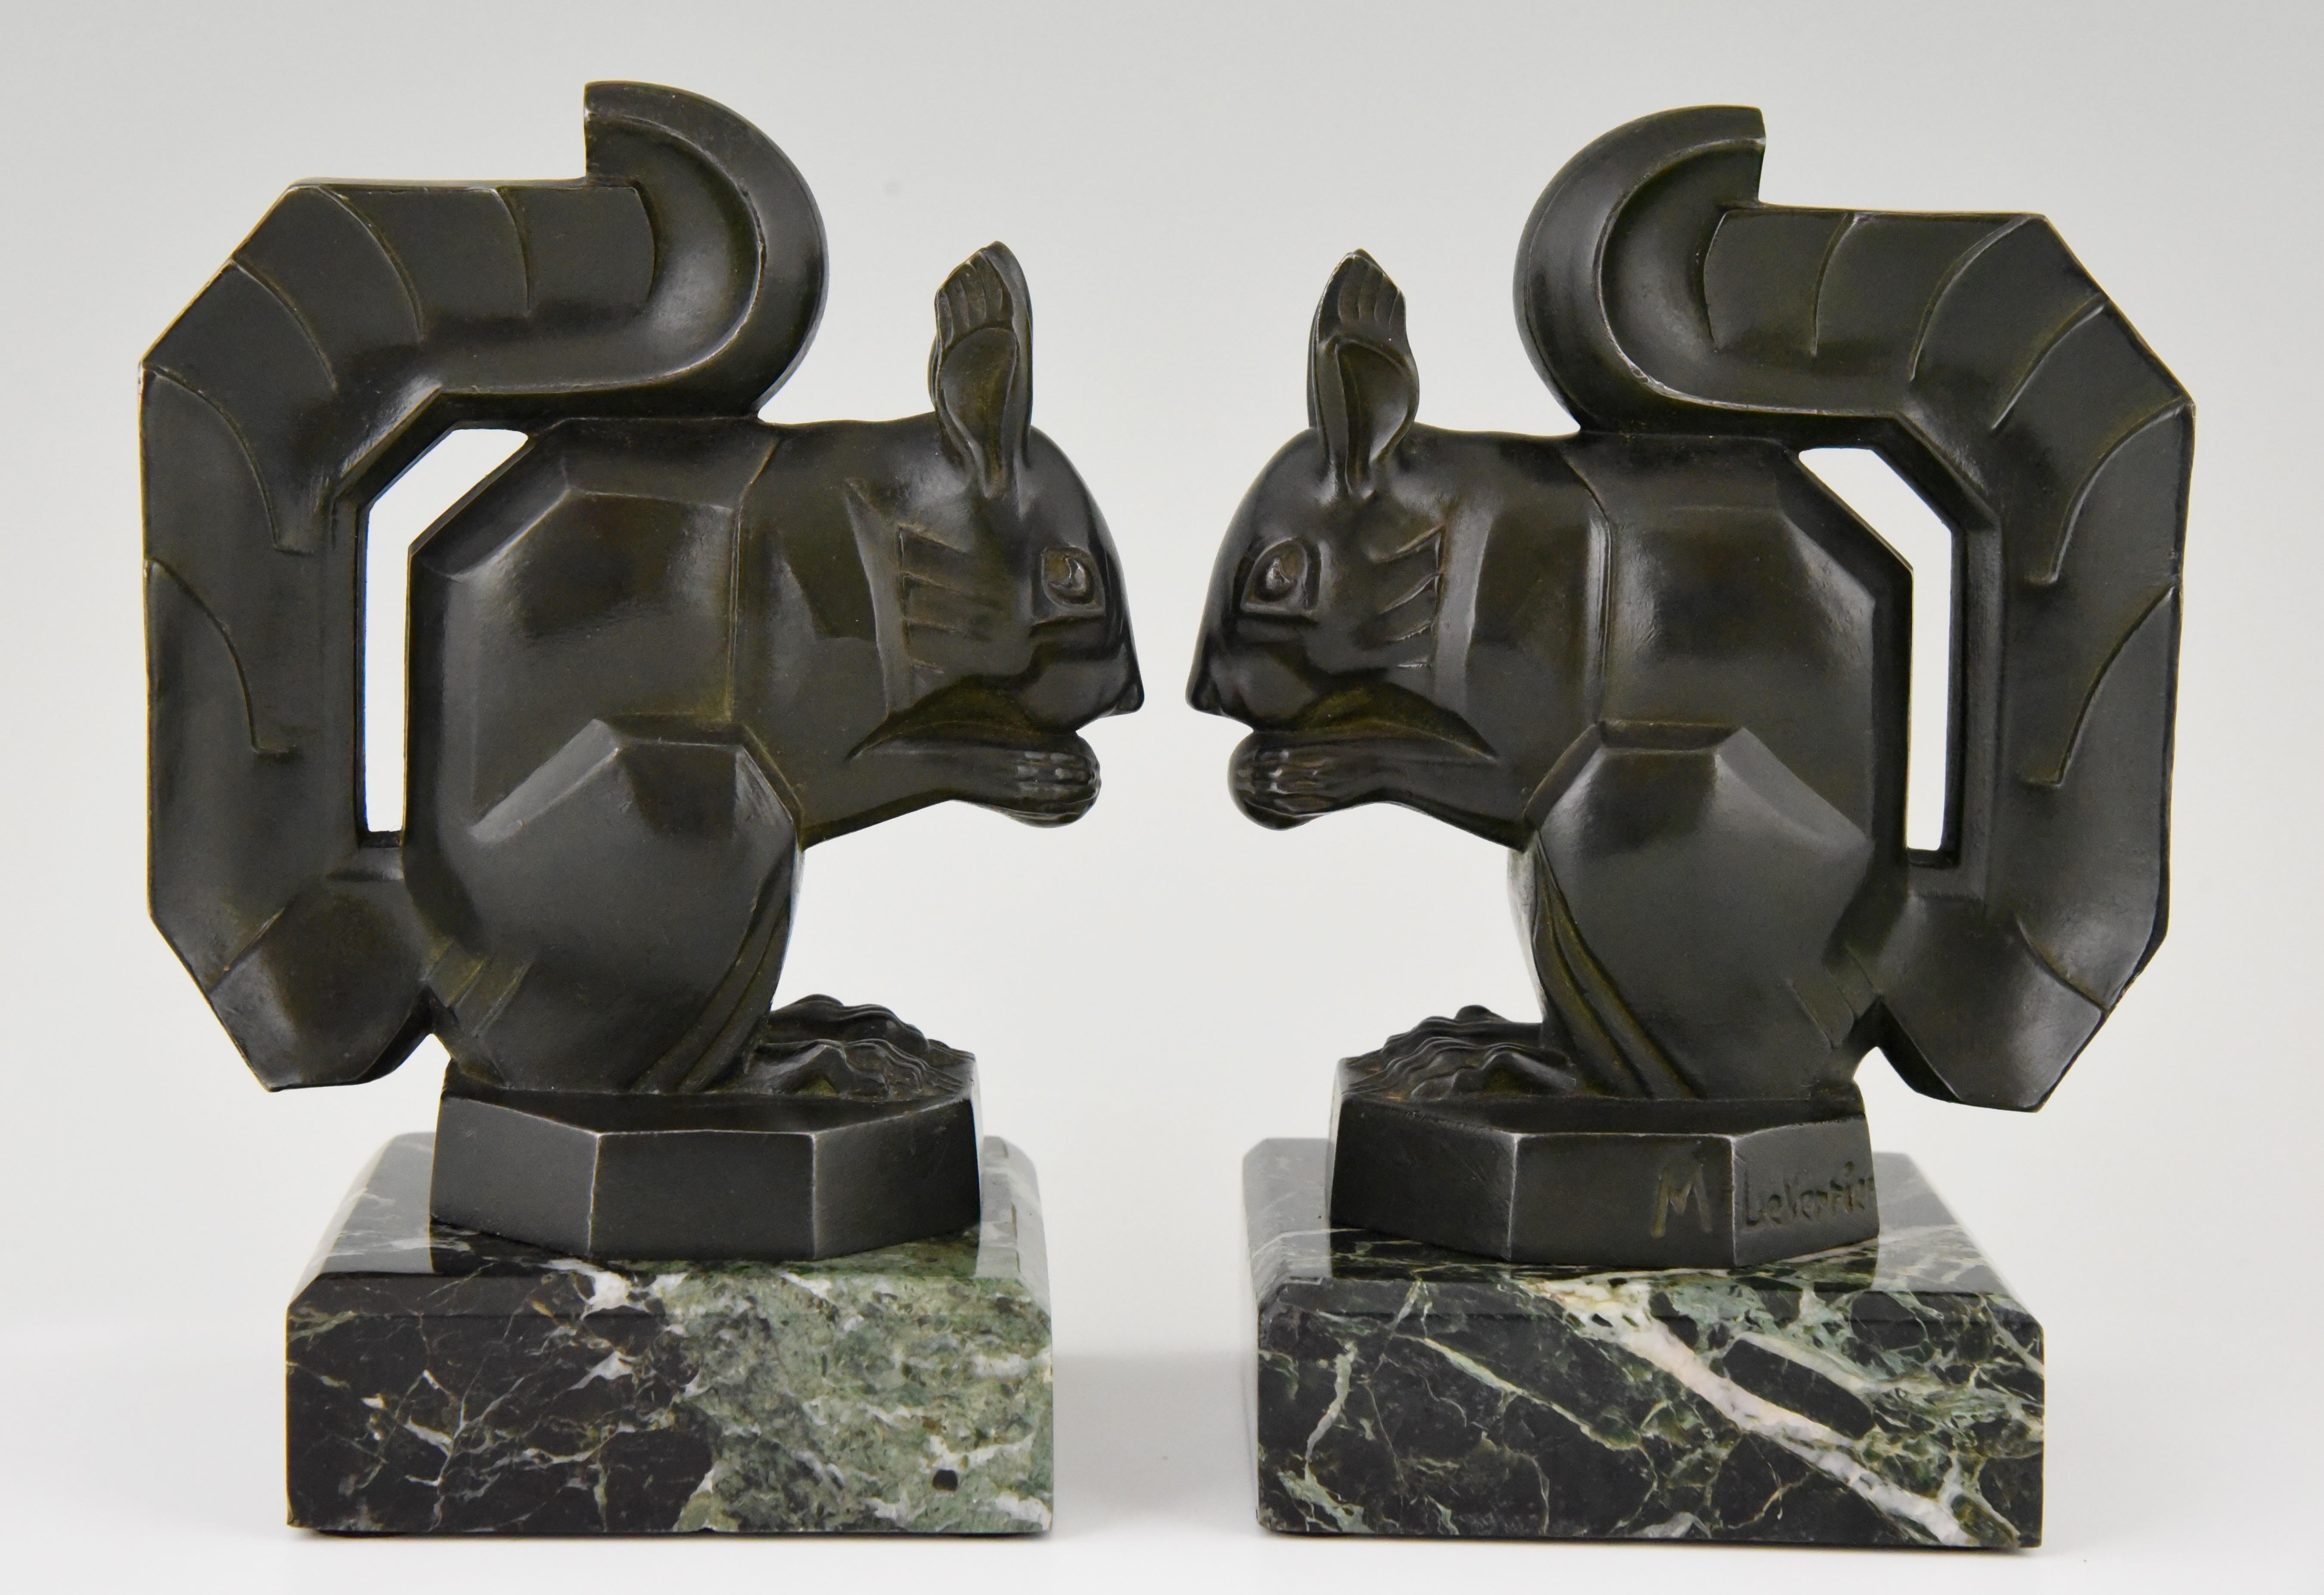 French Art Deco Squirrel Bookends by Max Le Verrier France, 1930